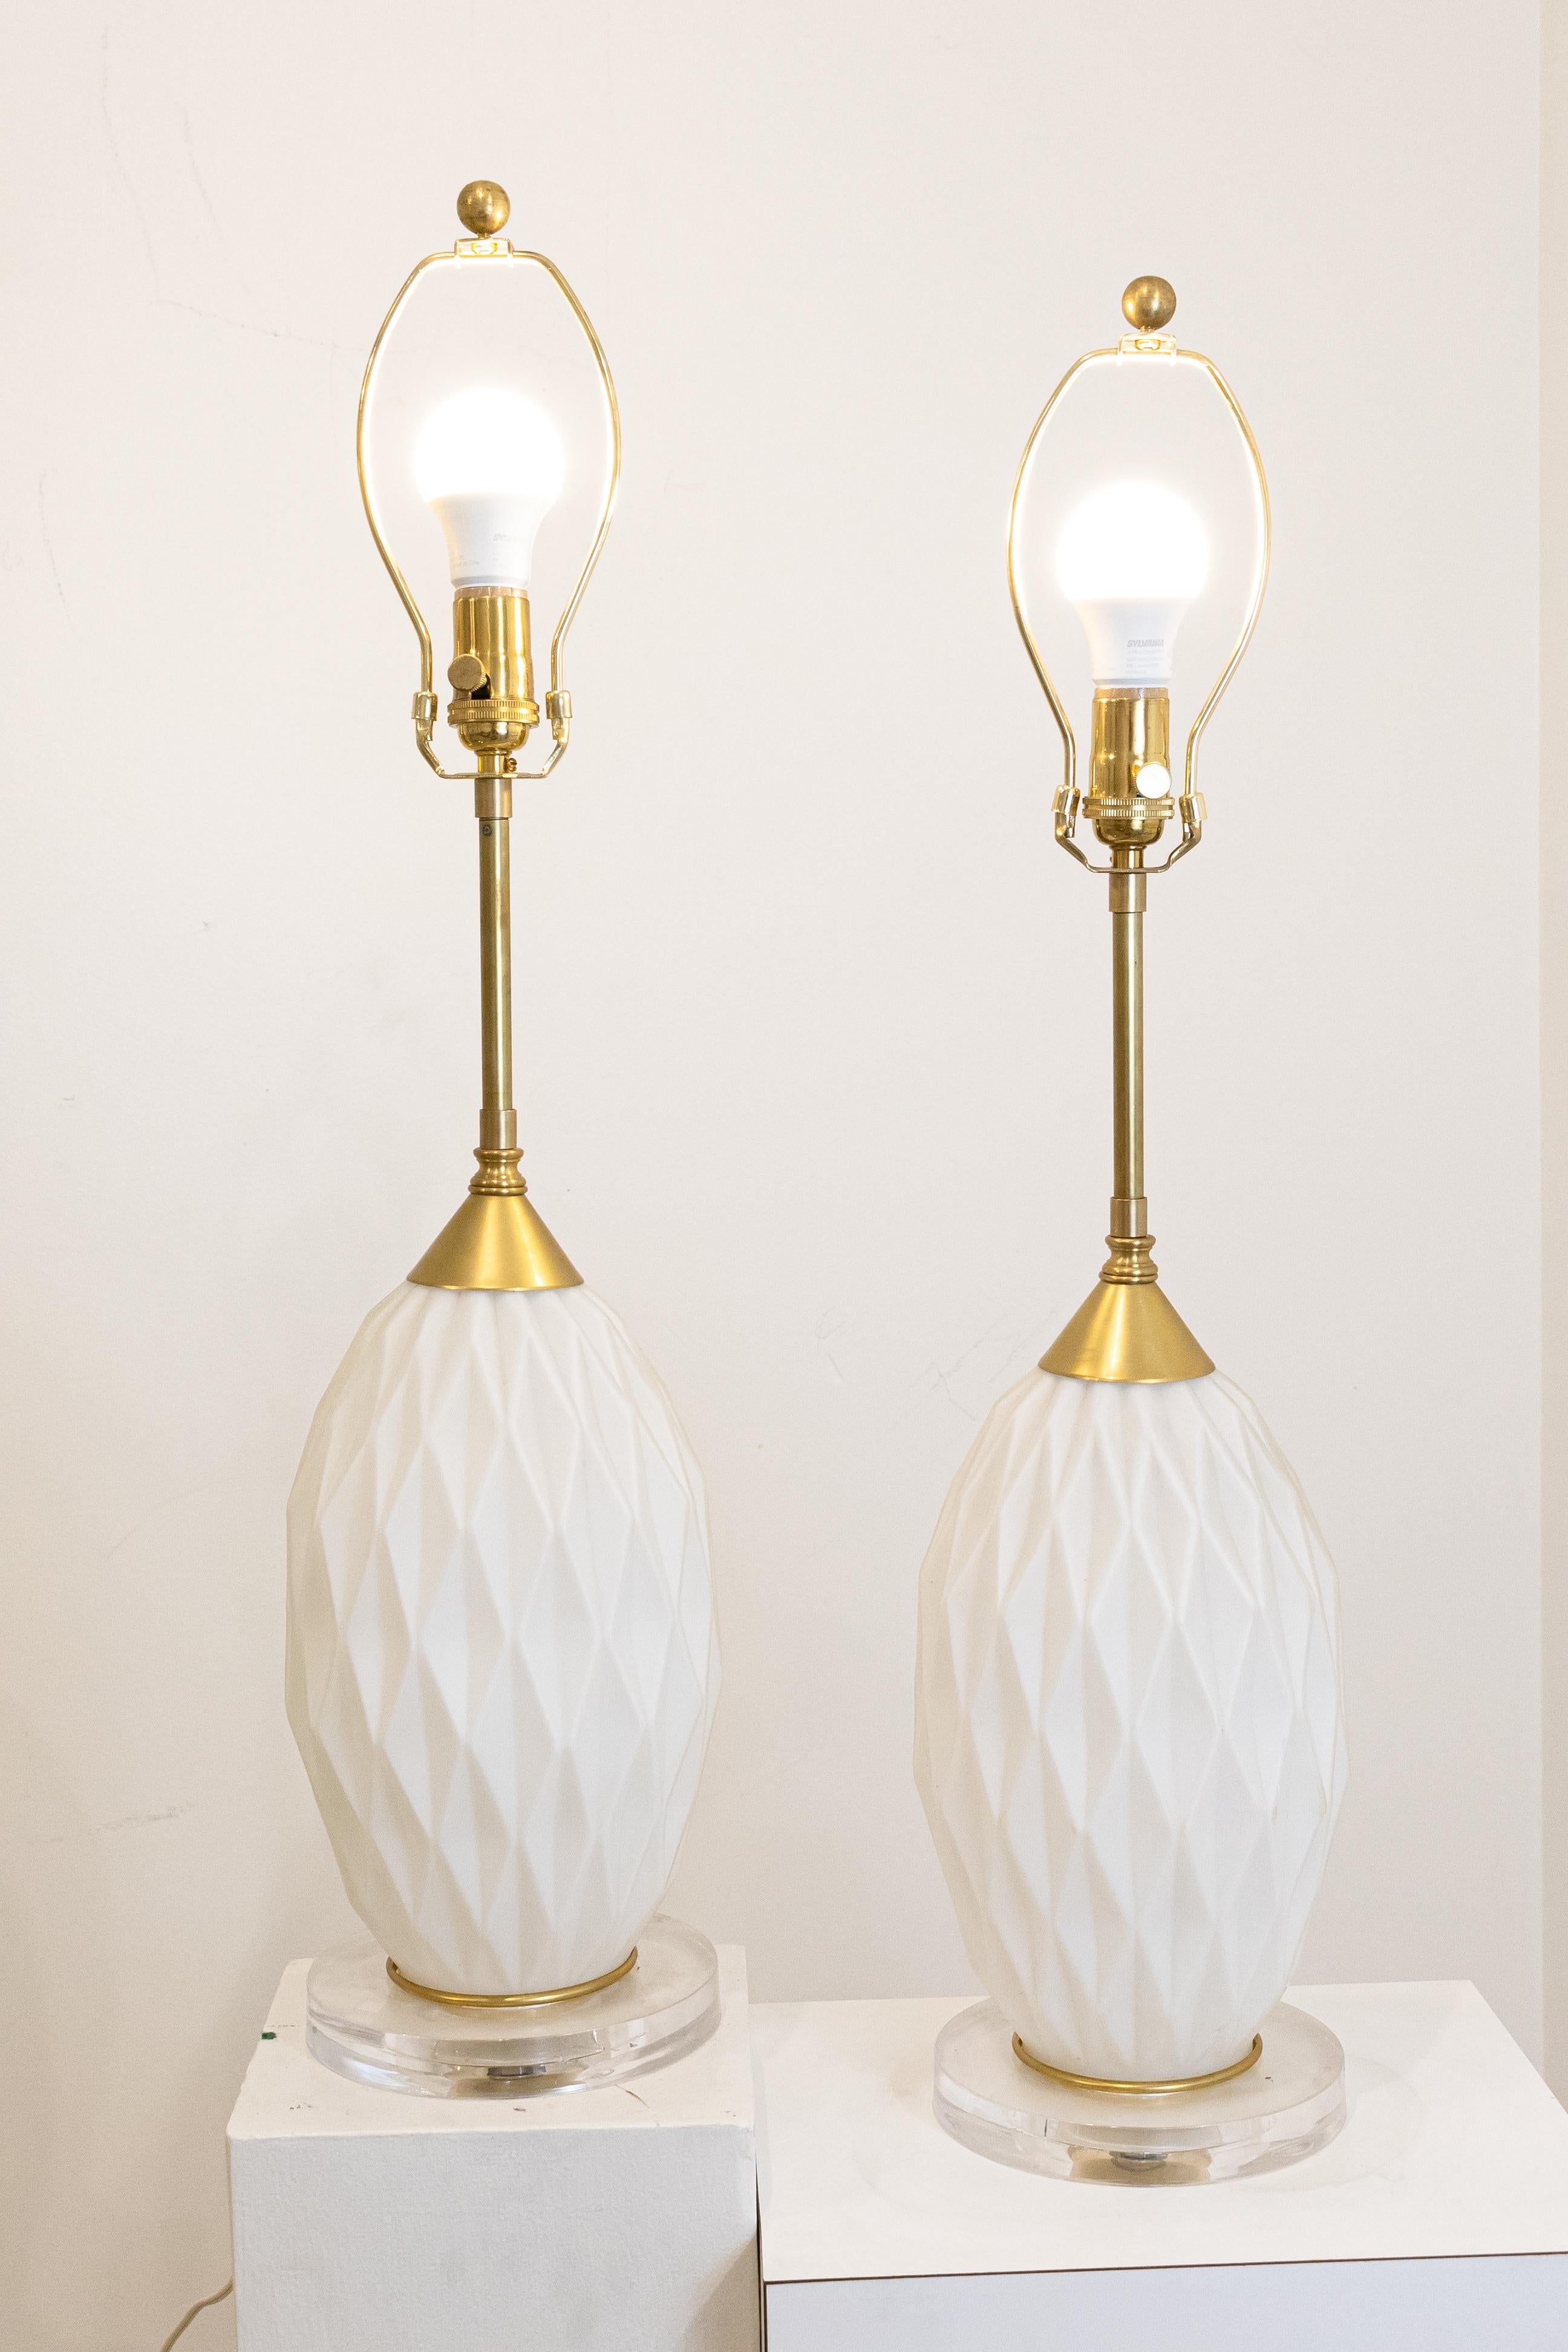 A pair of diamond cut glass, brass and lucite lamps in excellent condition. Dimensions: 7